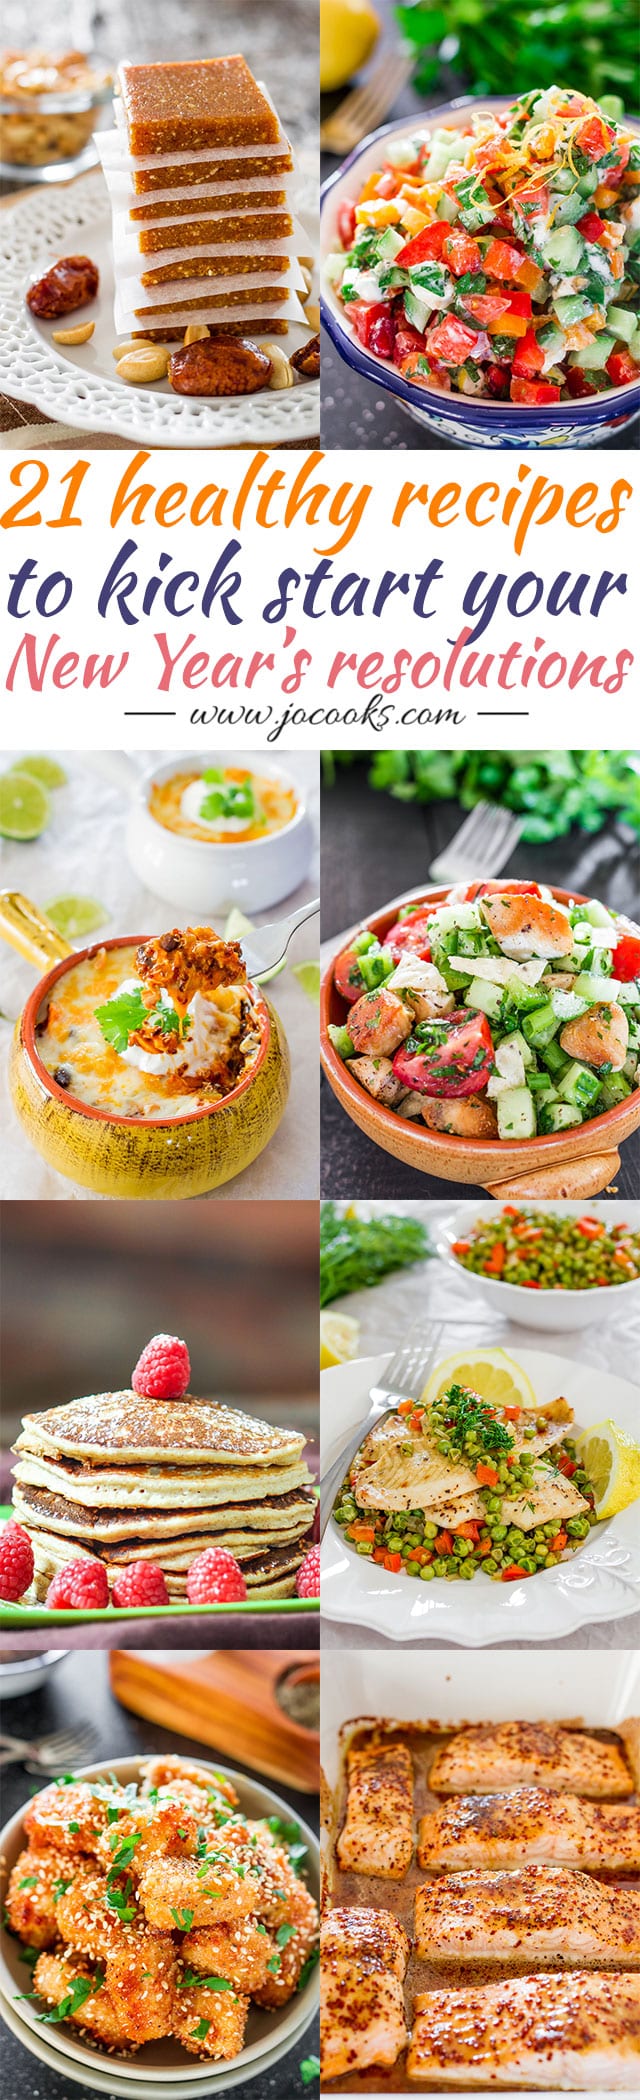 21 Healthy Recipes to Kick Start Your New Year's Resolutions photo collage